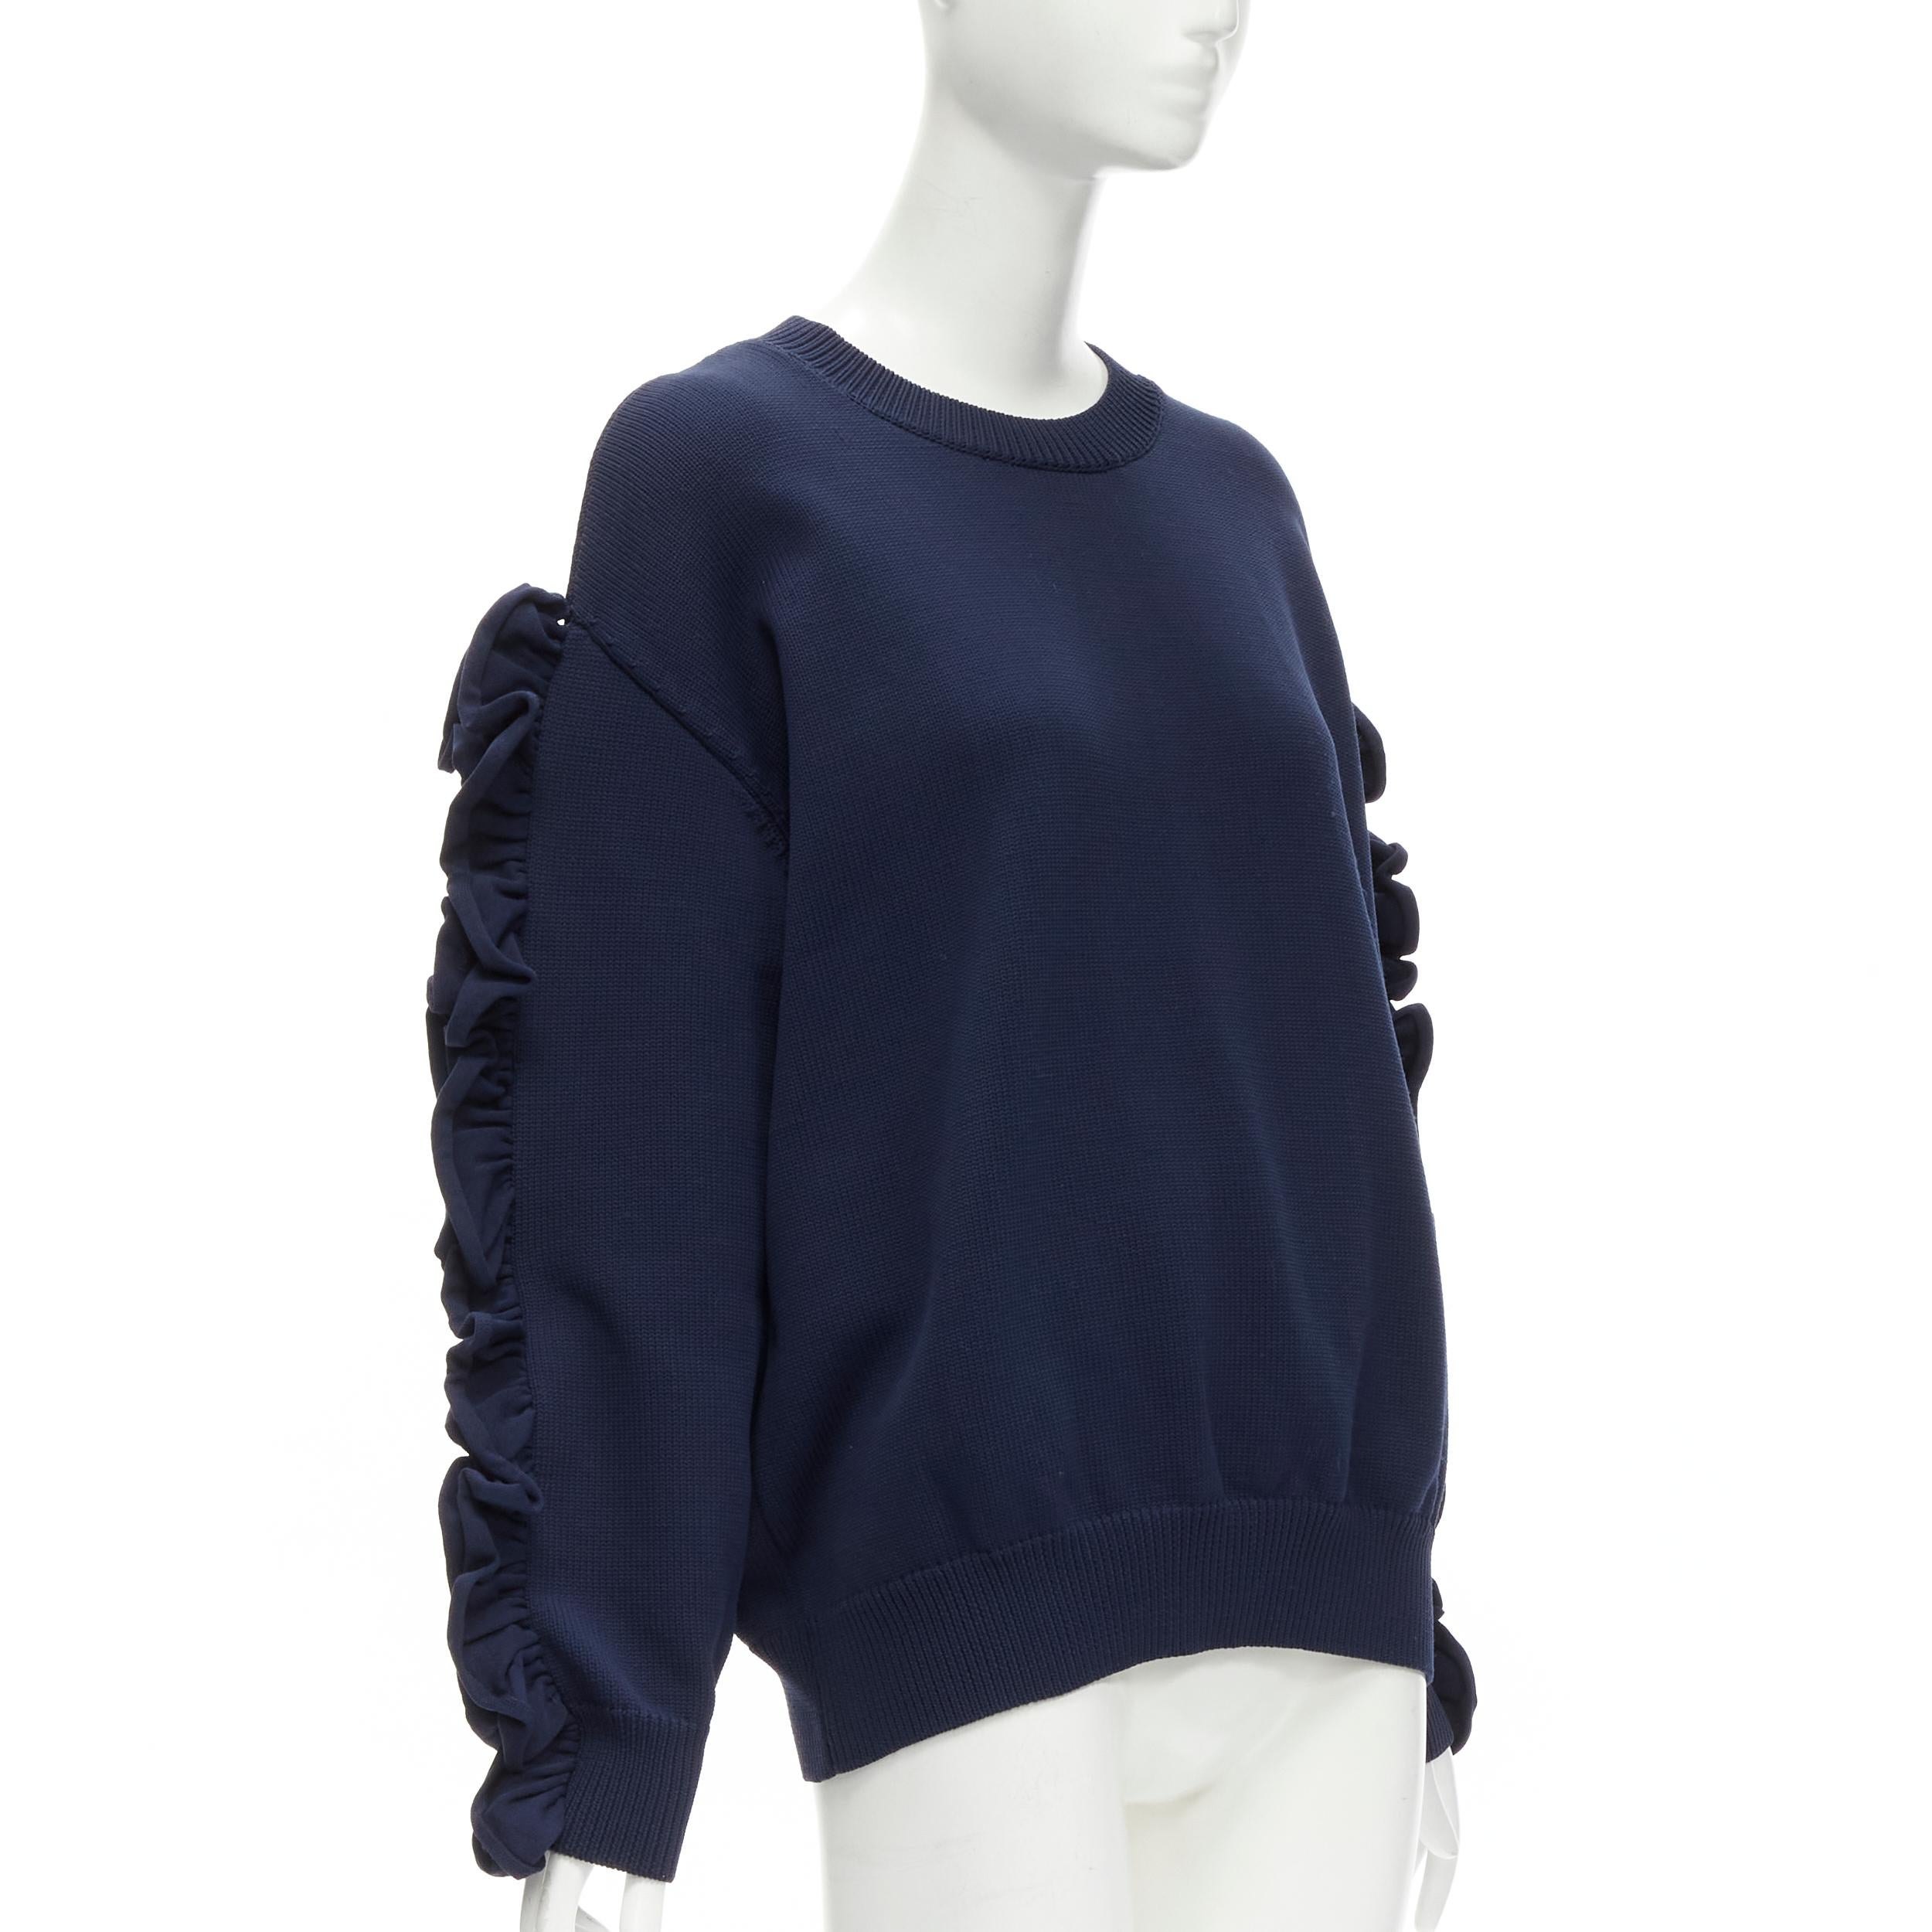 VICTORIA BECKHAM VVB navy blue ruffle sleeve pullover crew sweatshirt UK12 L
Reference: GIYG/A00257
Brand: VVB Victoria Beckham
Designer: Victoria Beckham
Material: Nylon
Color: Blue
Pattern: Solid
Closure: Pullover
Made in: